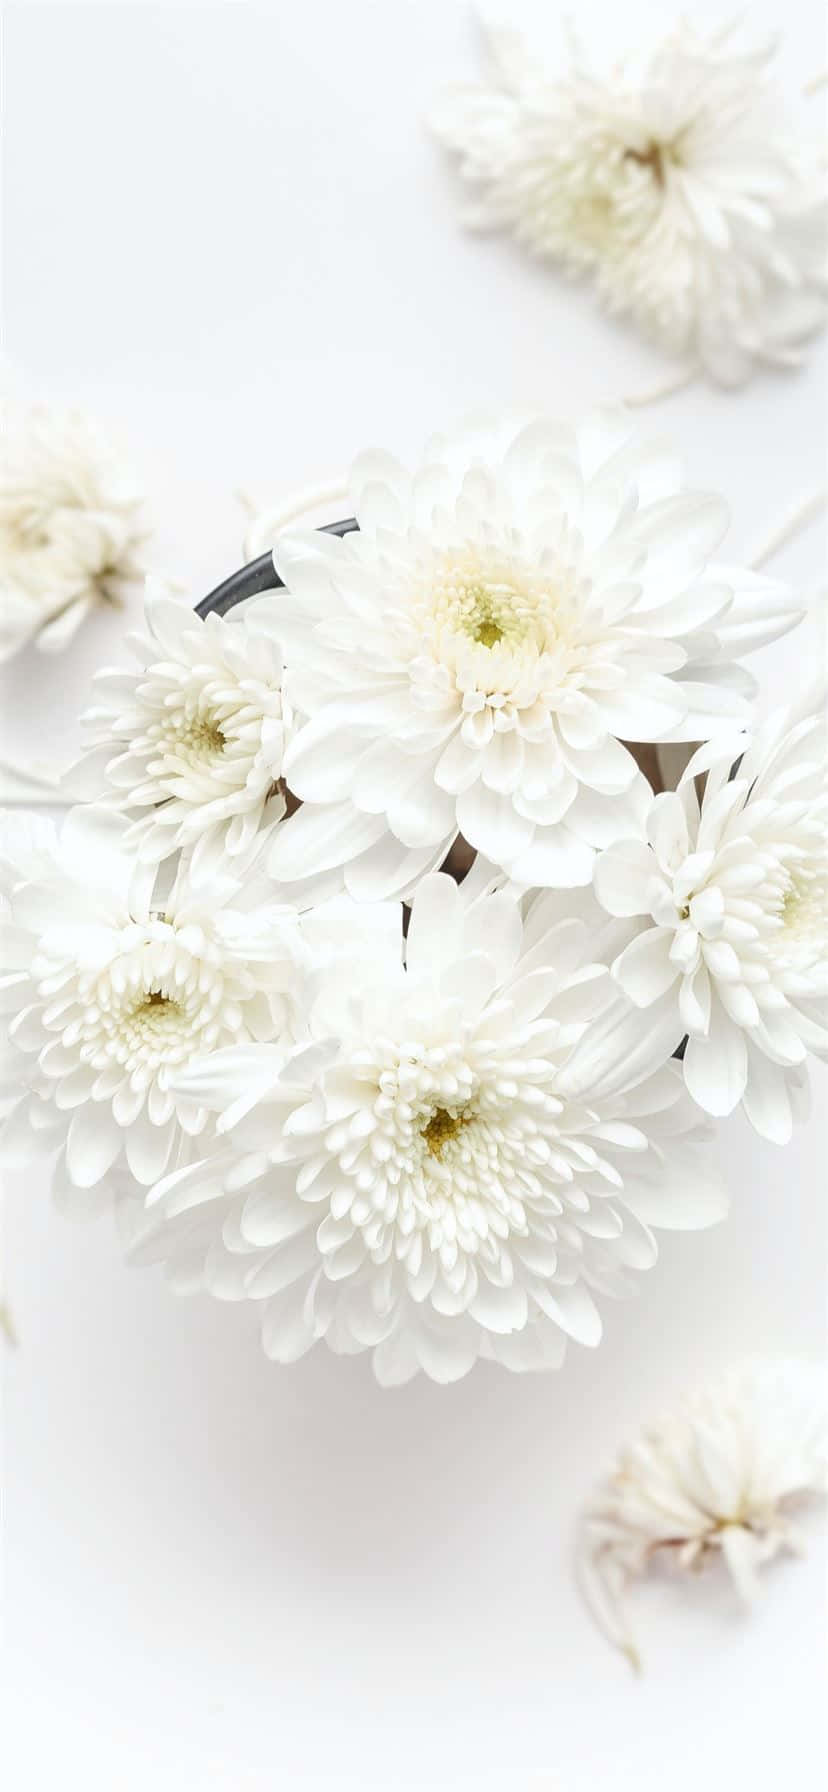 White Flowers In A Bowl On A White Surface